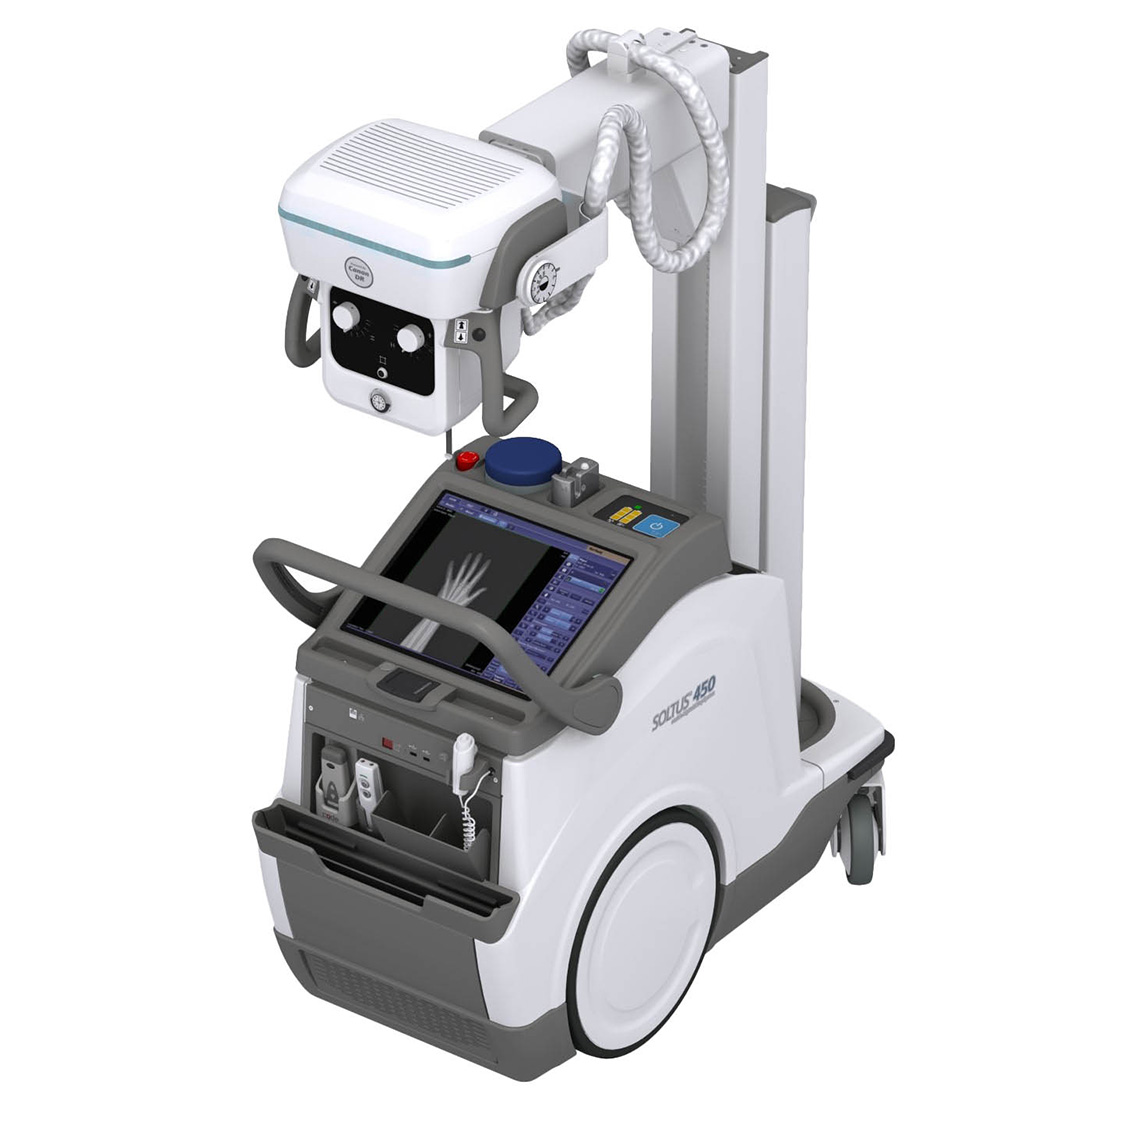 SOLTUS 450 Mobile Digital X-ray Systems